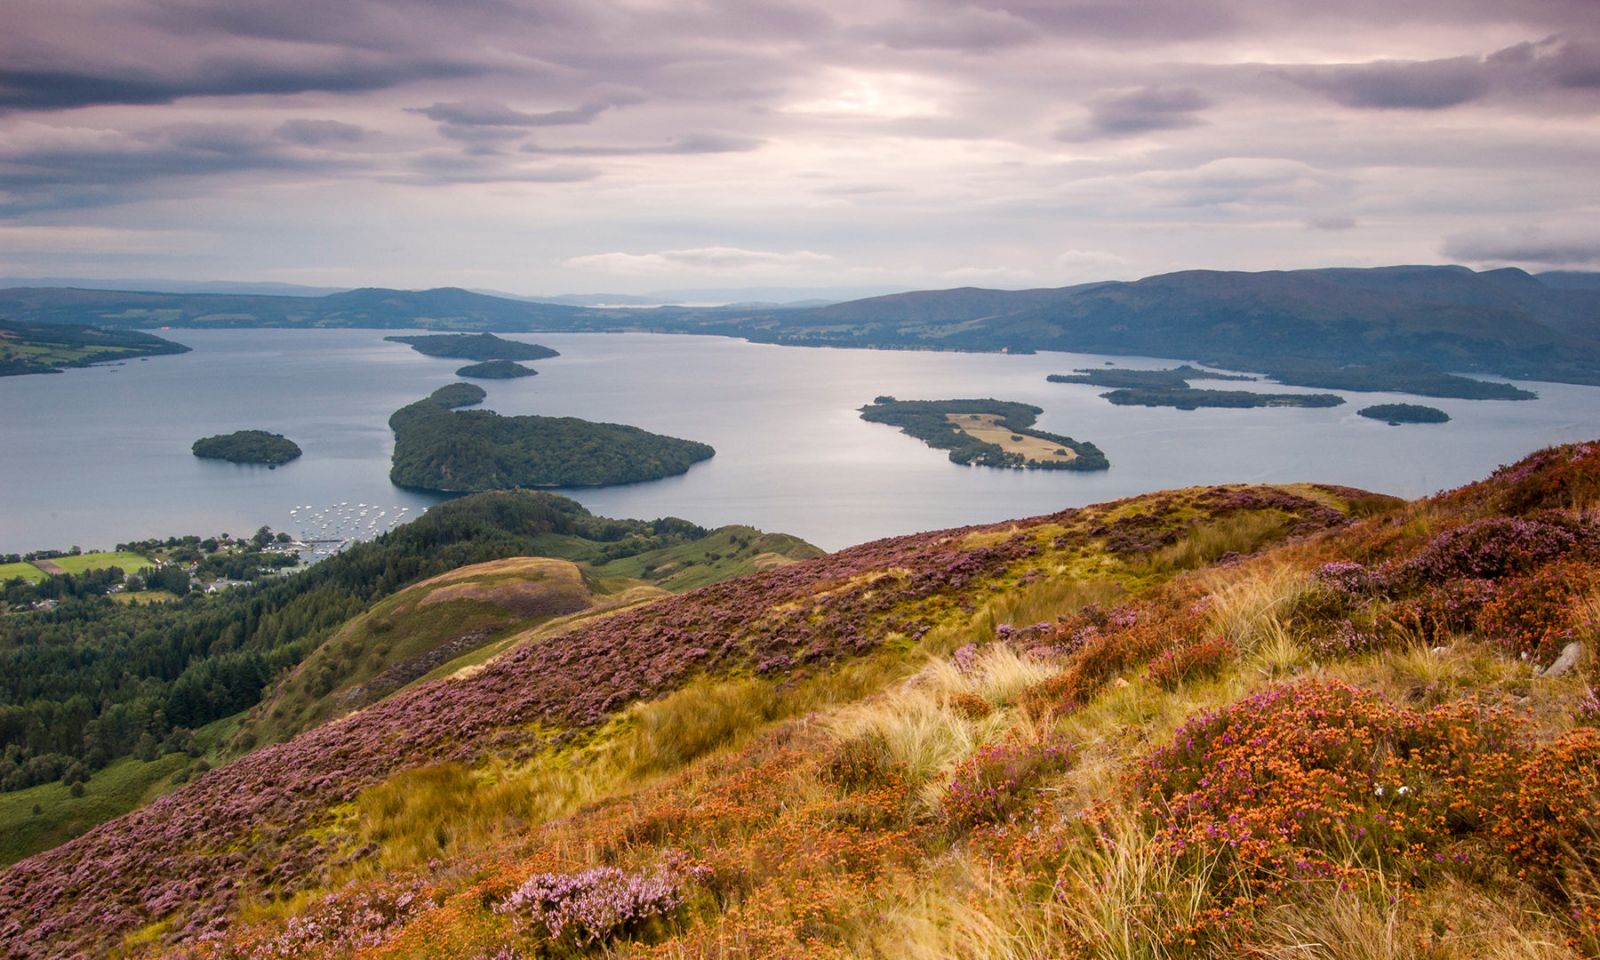 Loch Lomond and The Trossachs National Park - Suggested place to visit from Scottish Tourer with a Motorhome or Campervan Rental